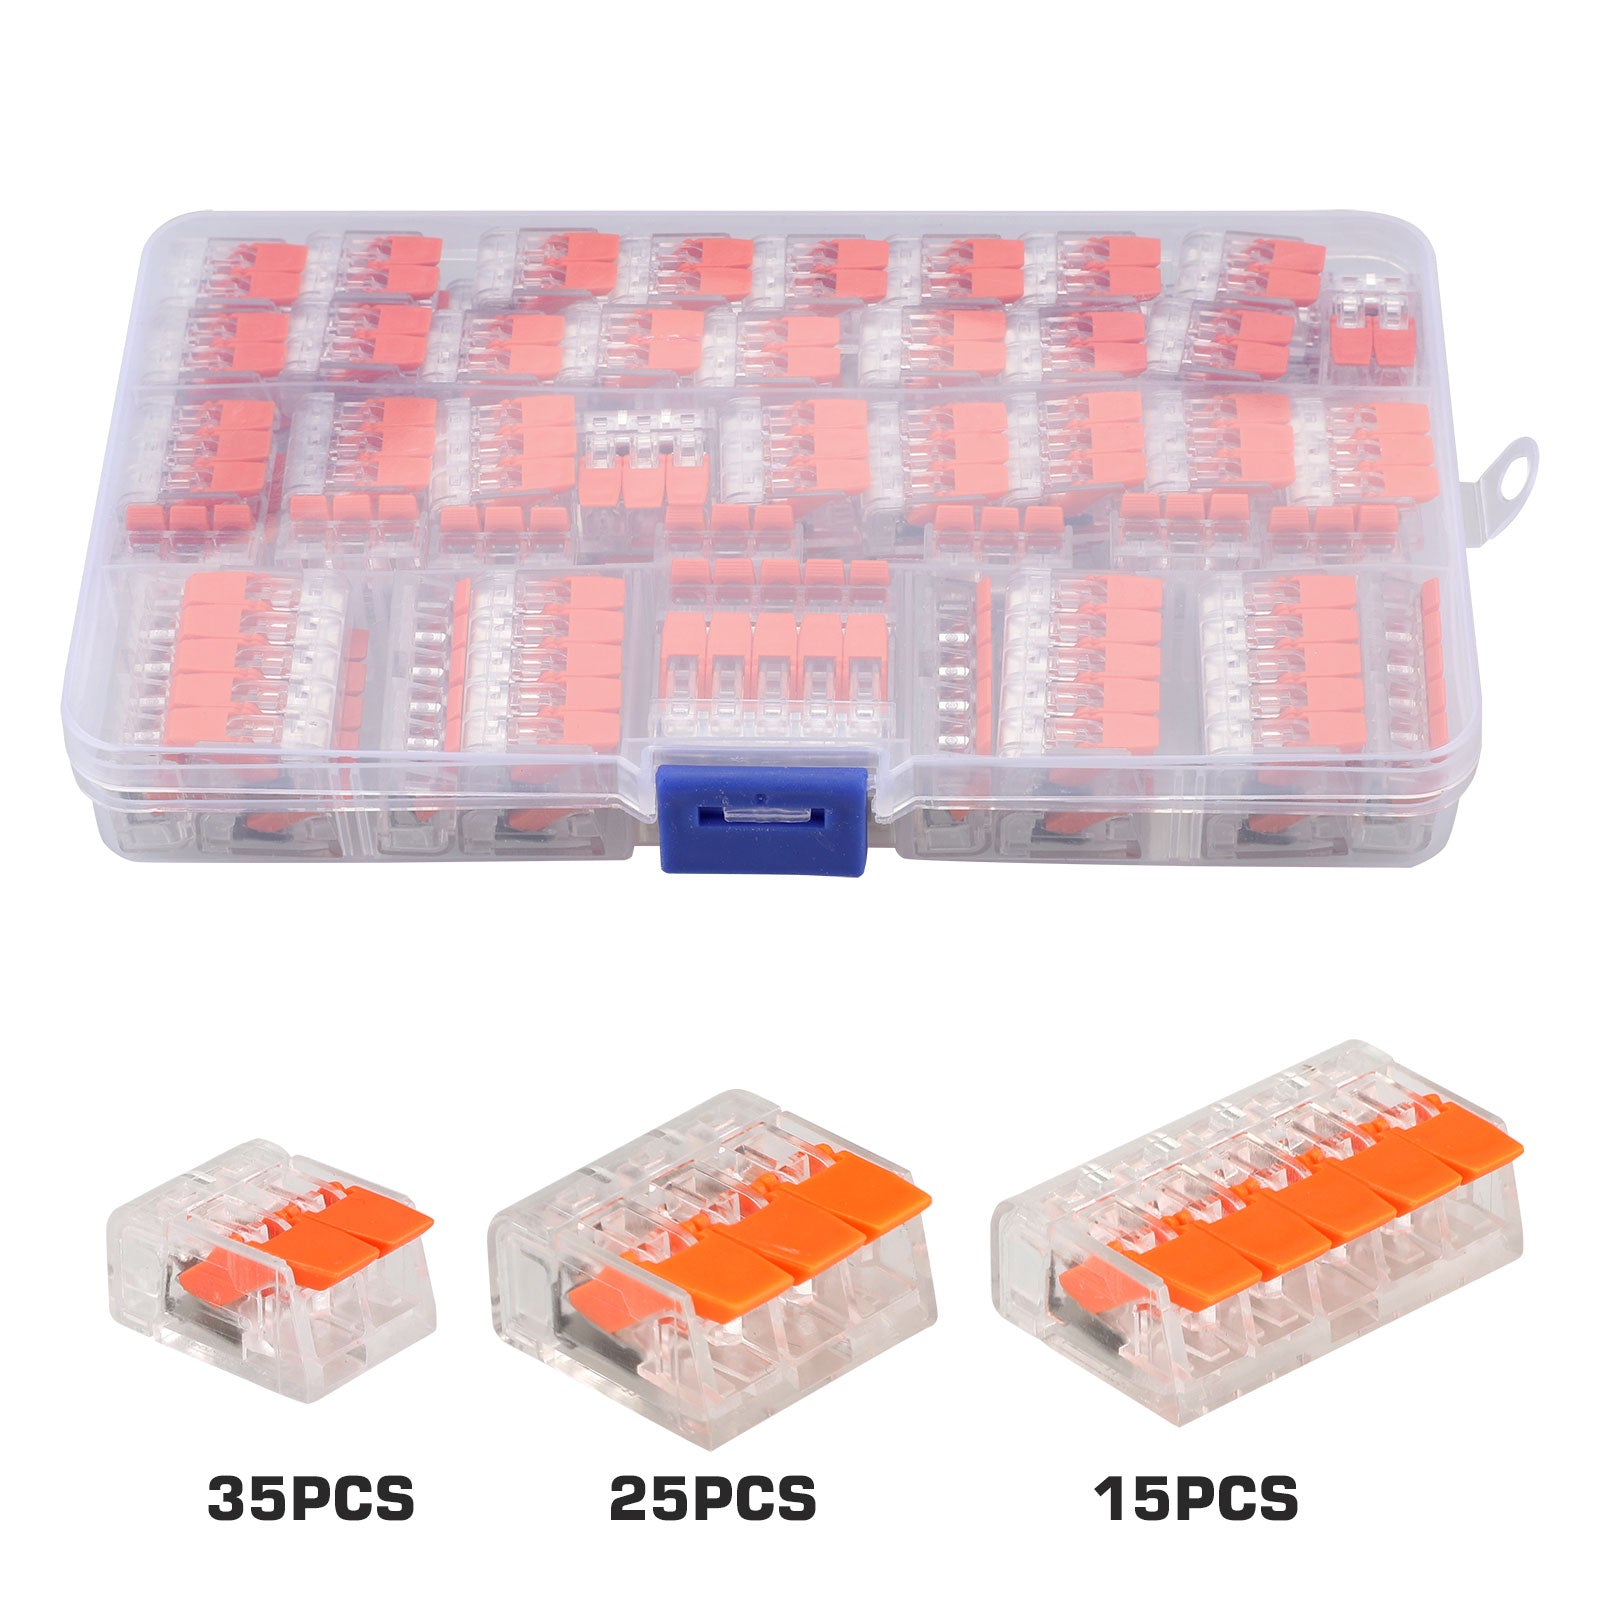 75PCS Splicing Connectors 2/3/5 Conductor Compact Assortment WAGO STYLE Replacement 221-412 Kits for Electrical Solid Stranded Flexible Wires